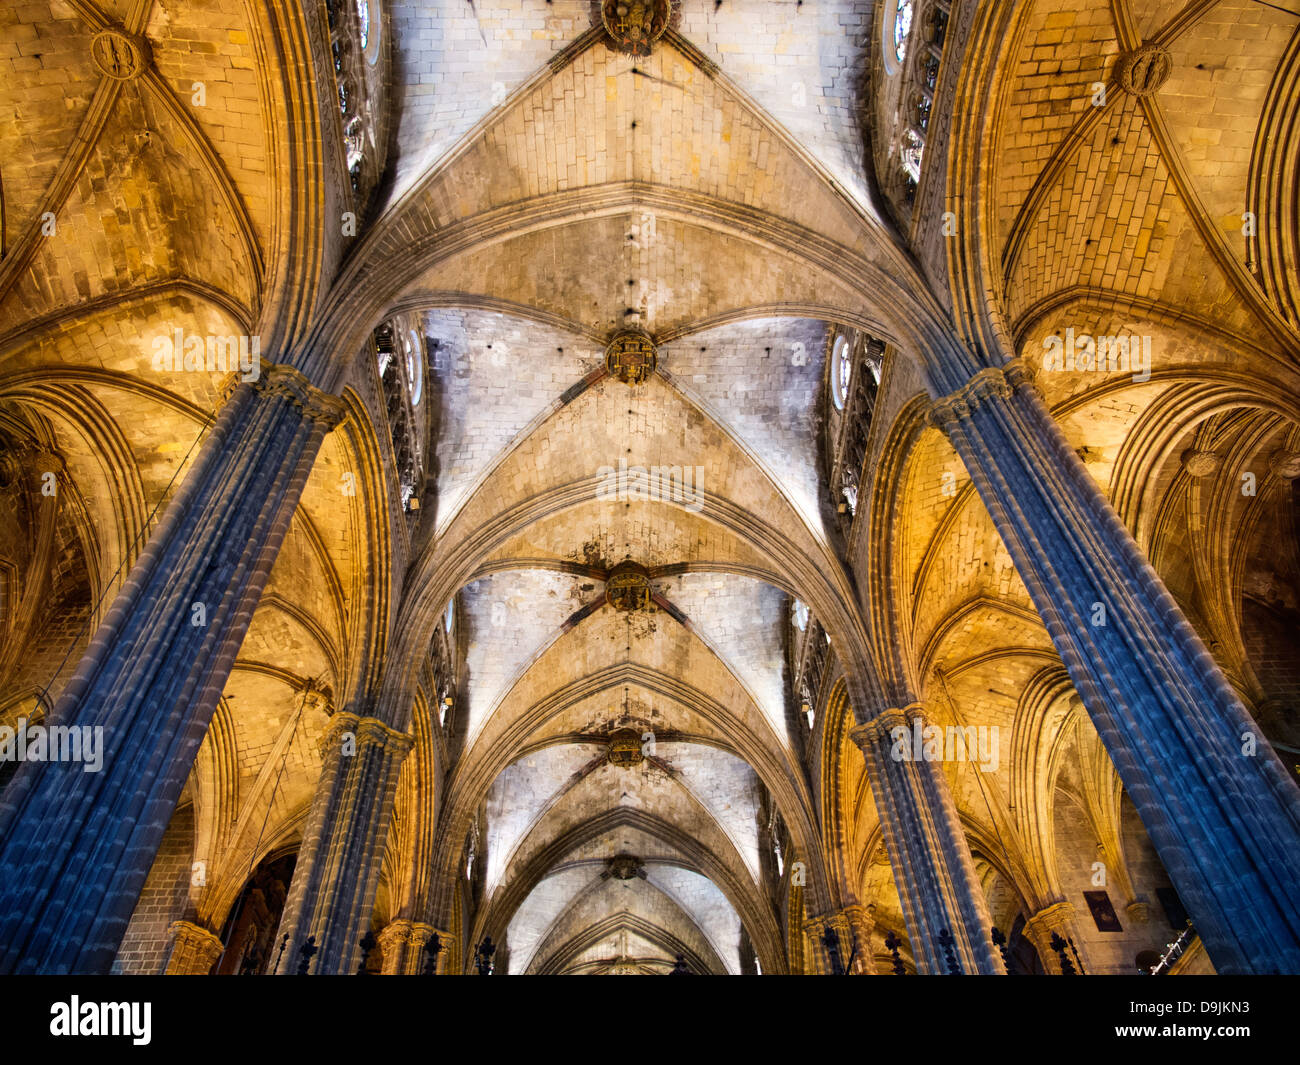 Interior of the Santa Eulalia Cathedral in Barcelona's Gothic Quarter, Spain 1 Stock Photo